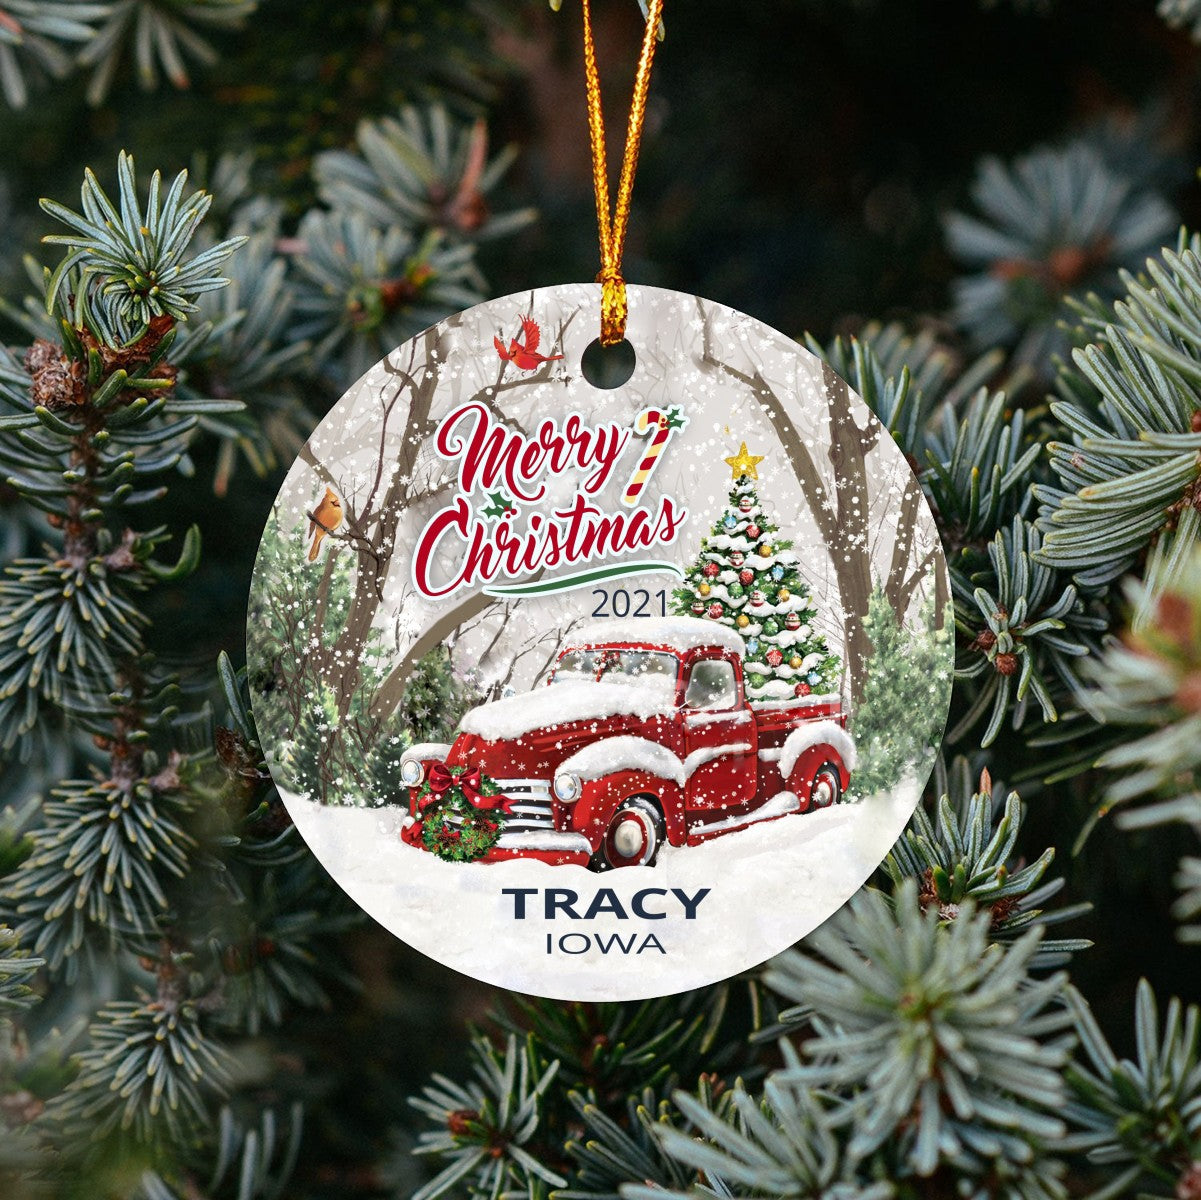 Christmas Tree Ornaments Tracy - Ornament With Name City, State Tracy Iowa IA Ornament - Red Truck Xmas Ornaments 3'' Plastic Gift For Family, Friend And Housewarming